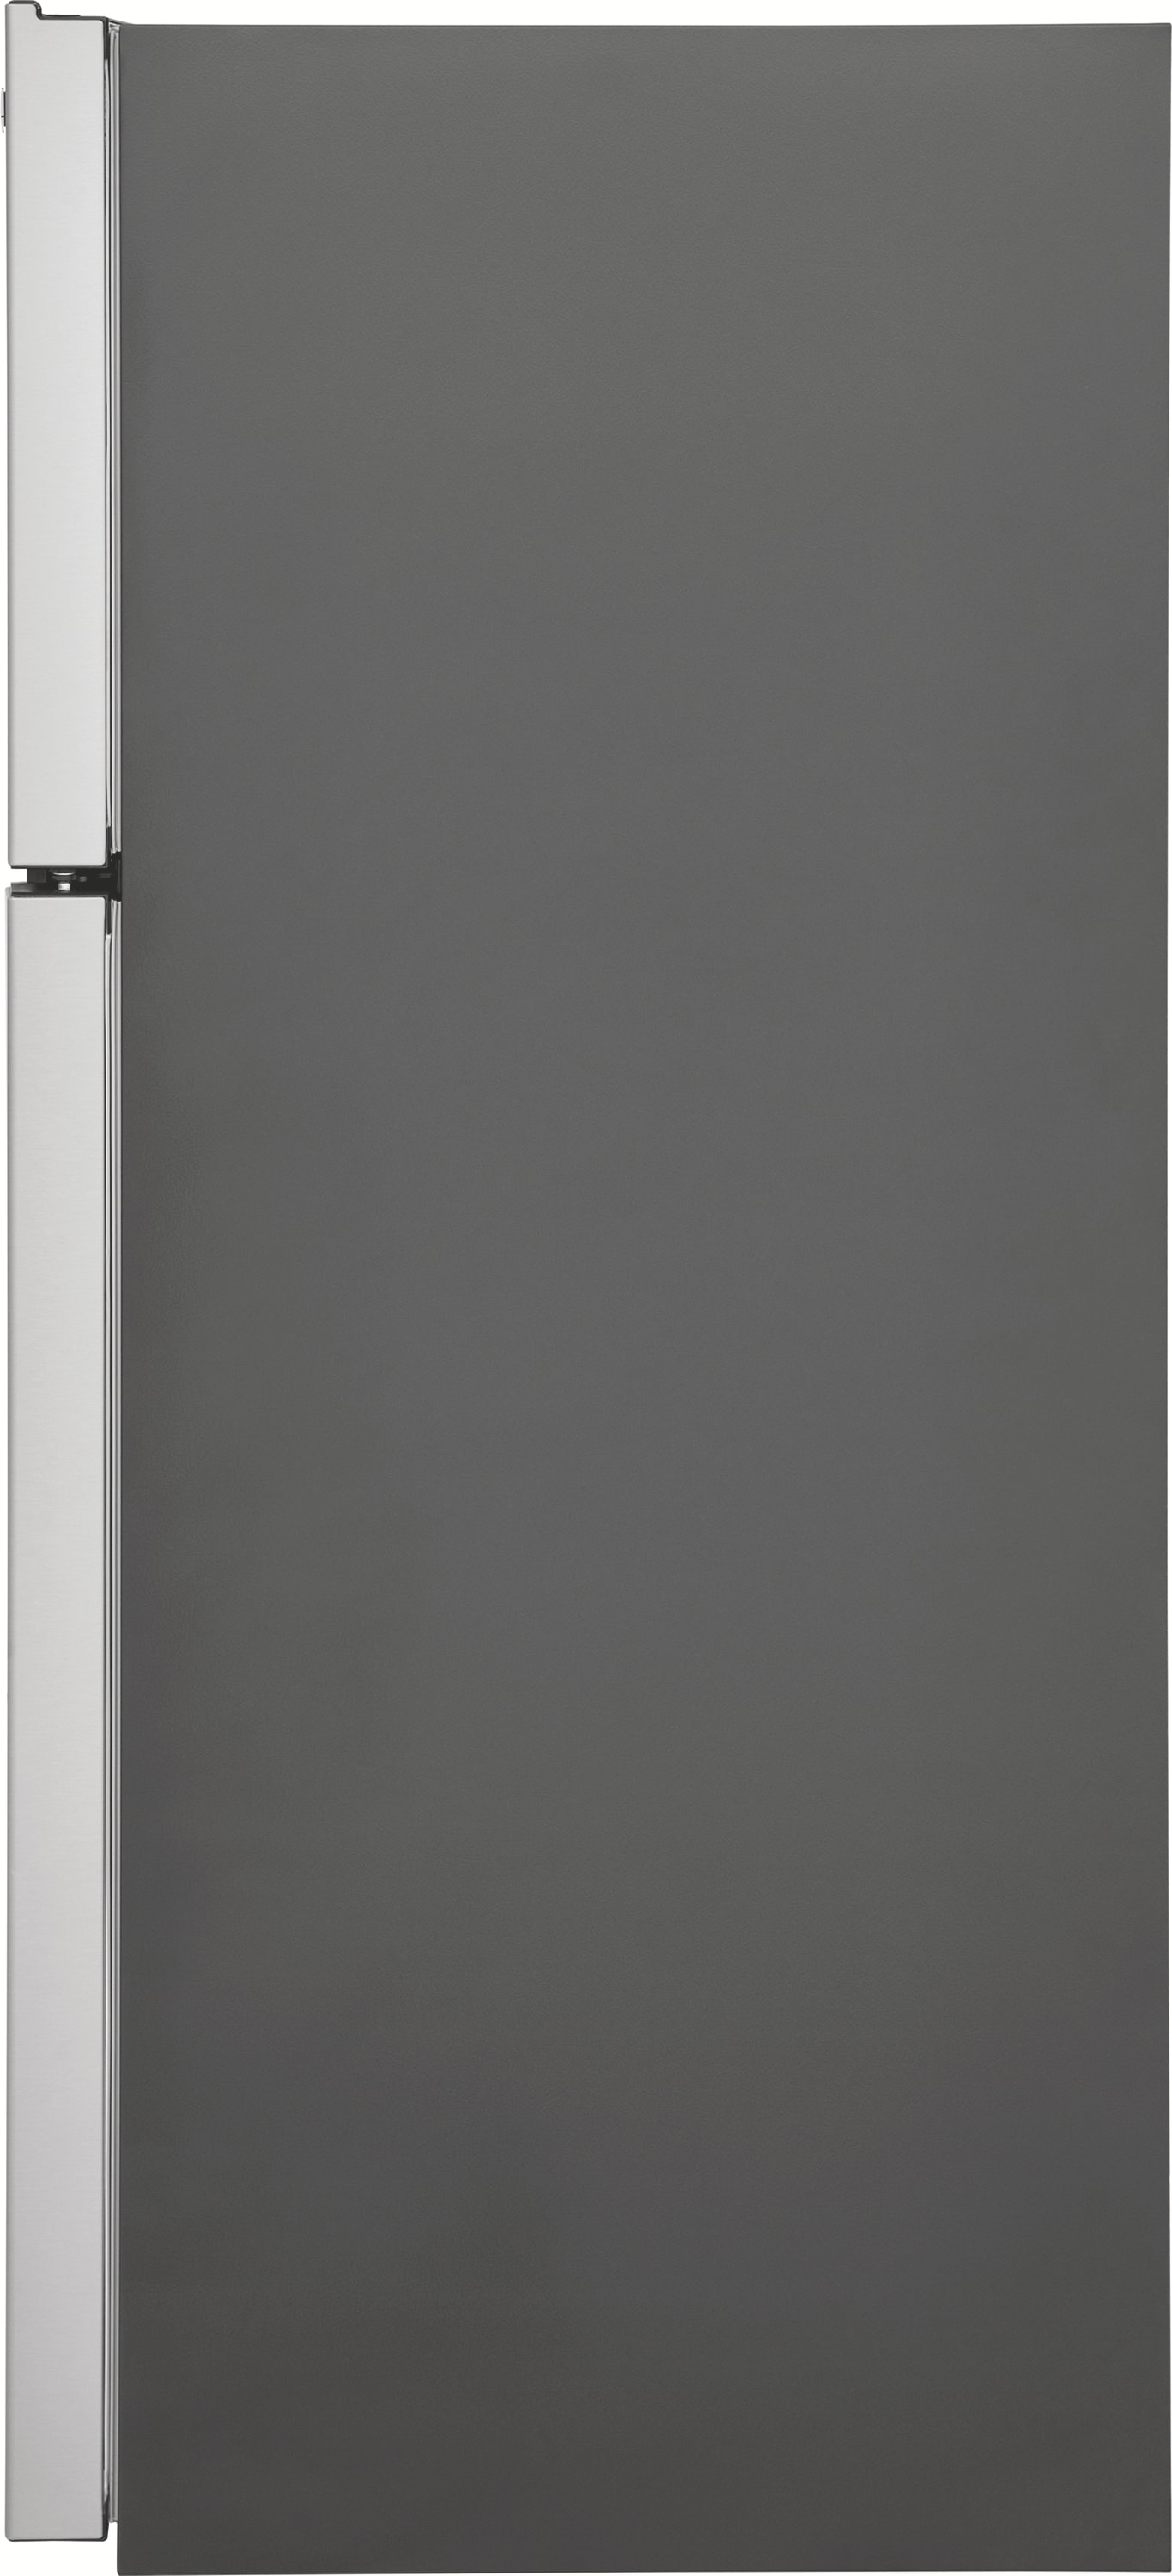 20.0 Cu. Ft. Top Freezer Refrigerator Stainless Steel-FGHT2055VF